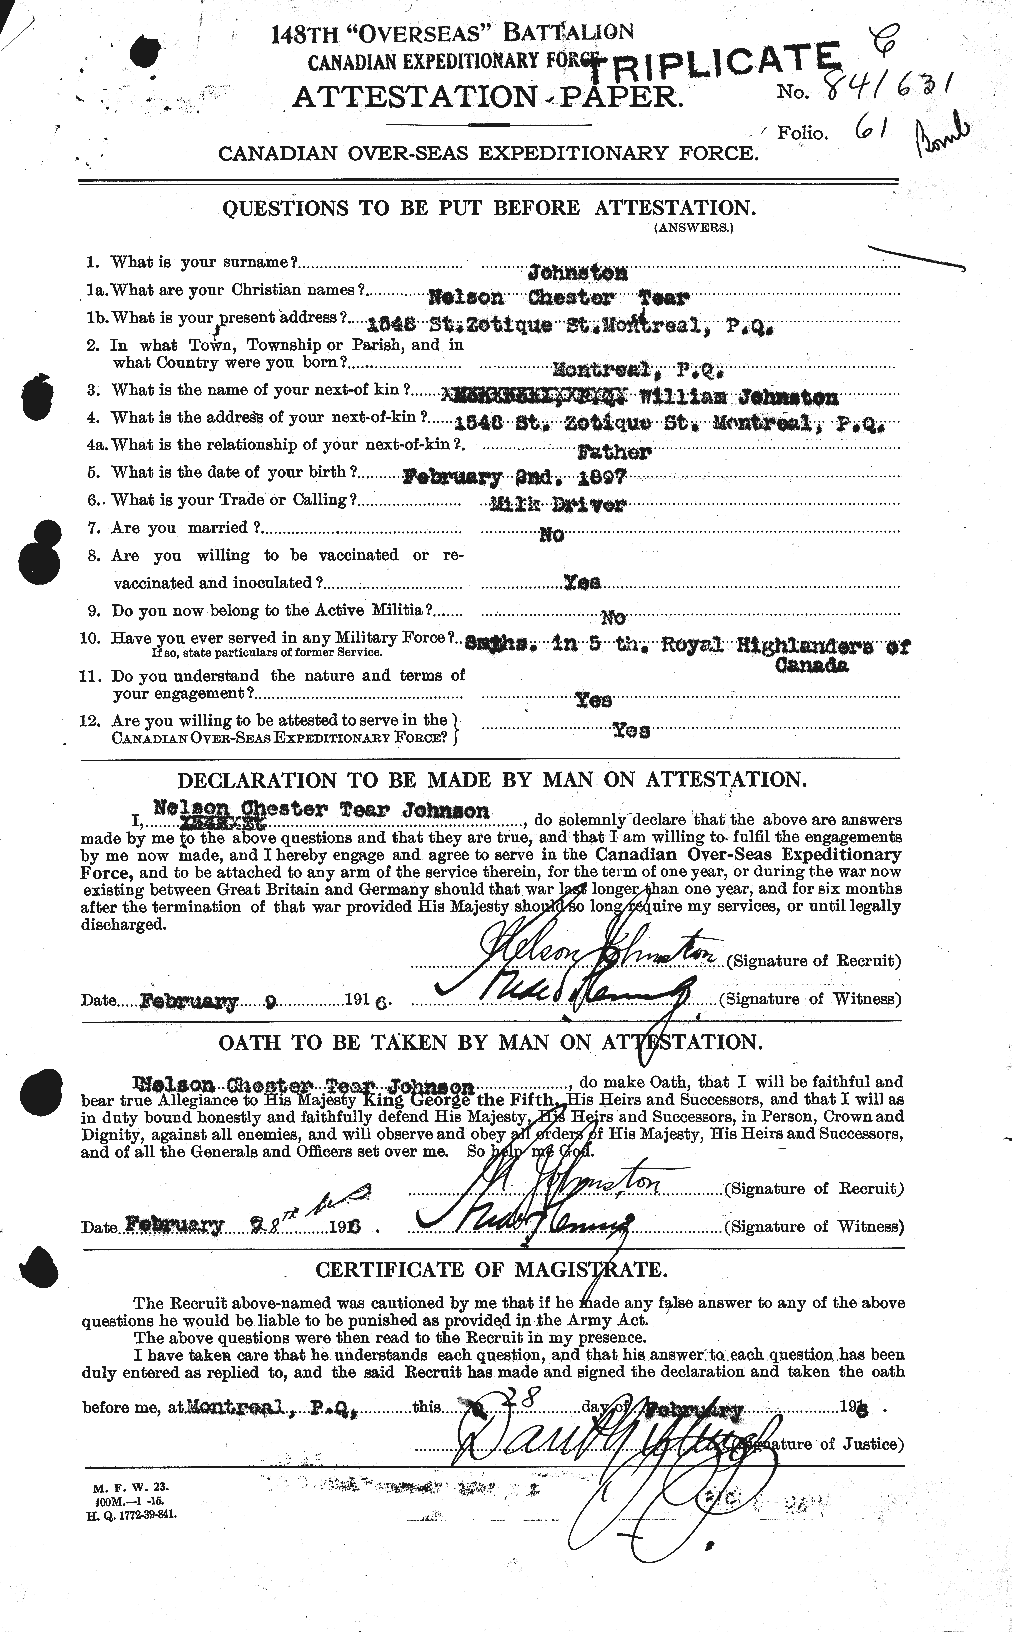 Personnel Records of the First World War - CEF 423000a